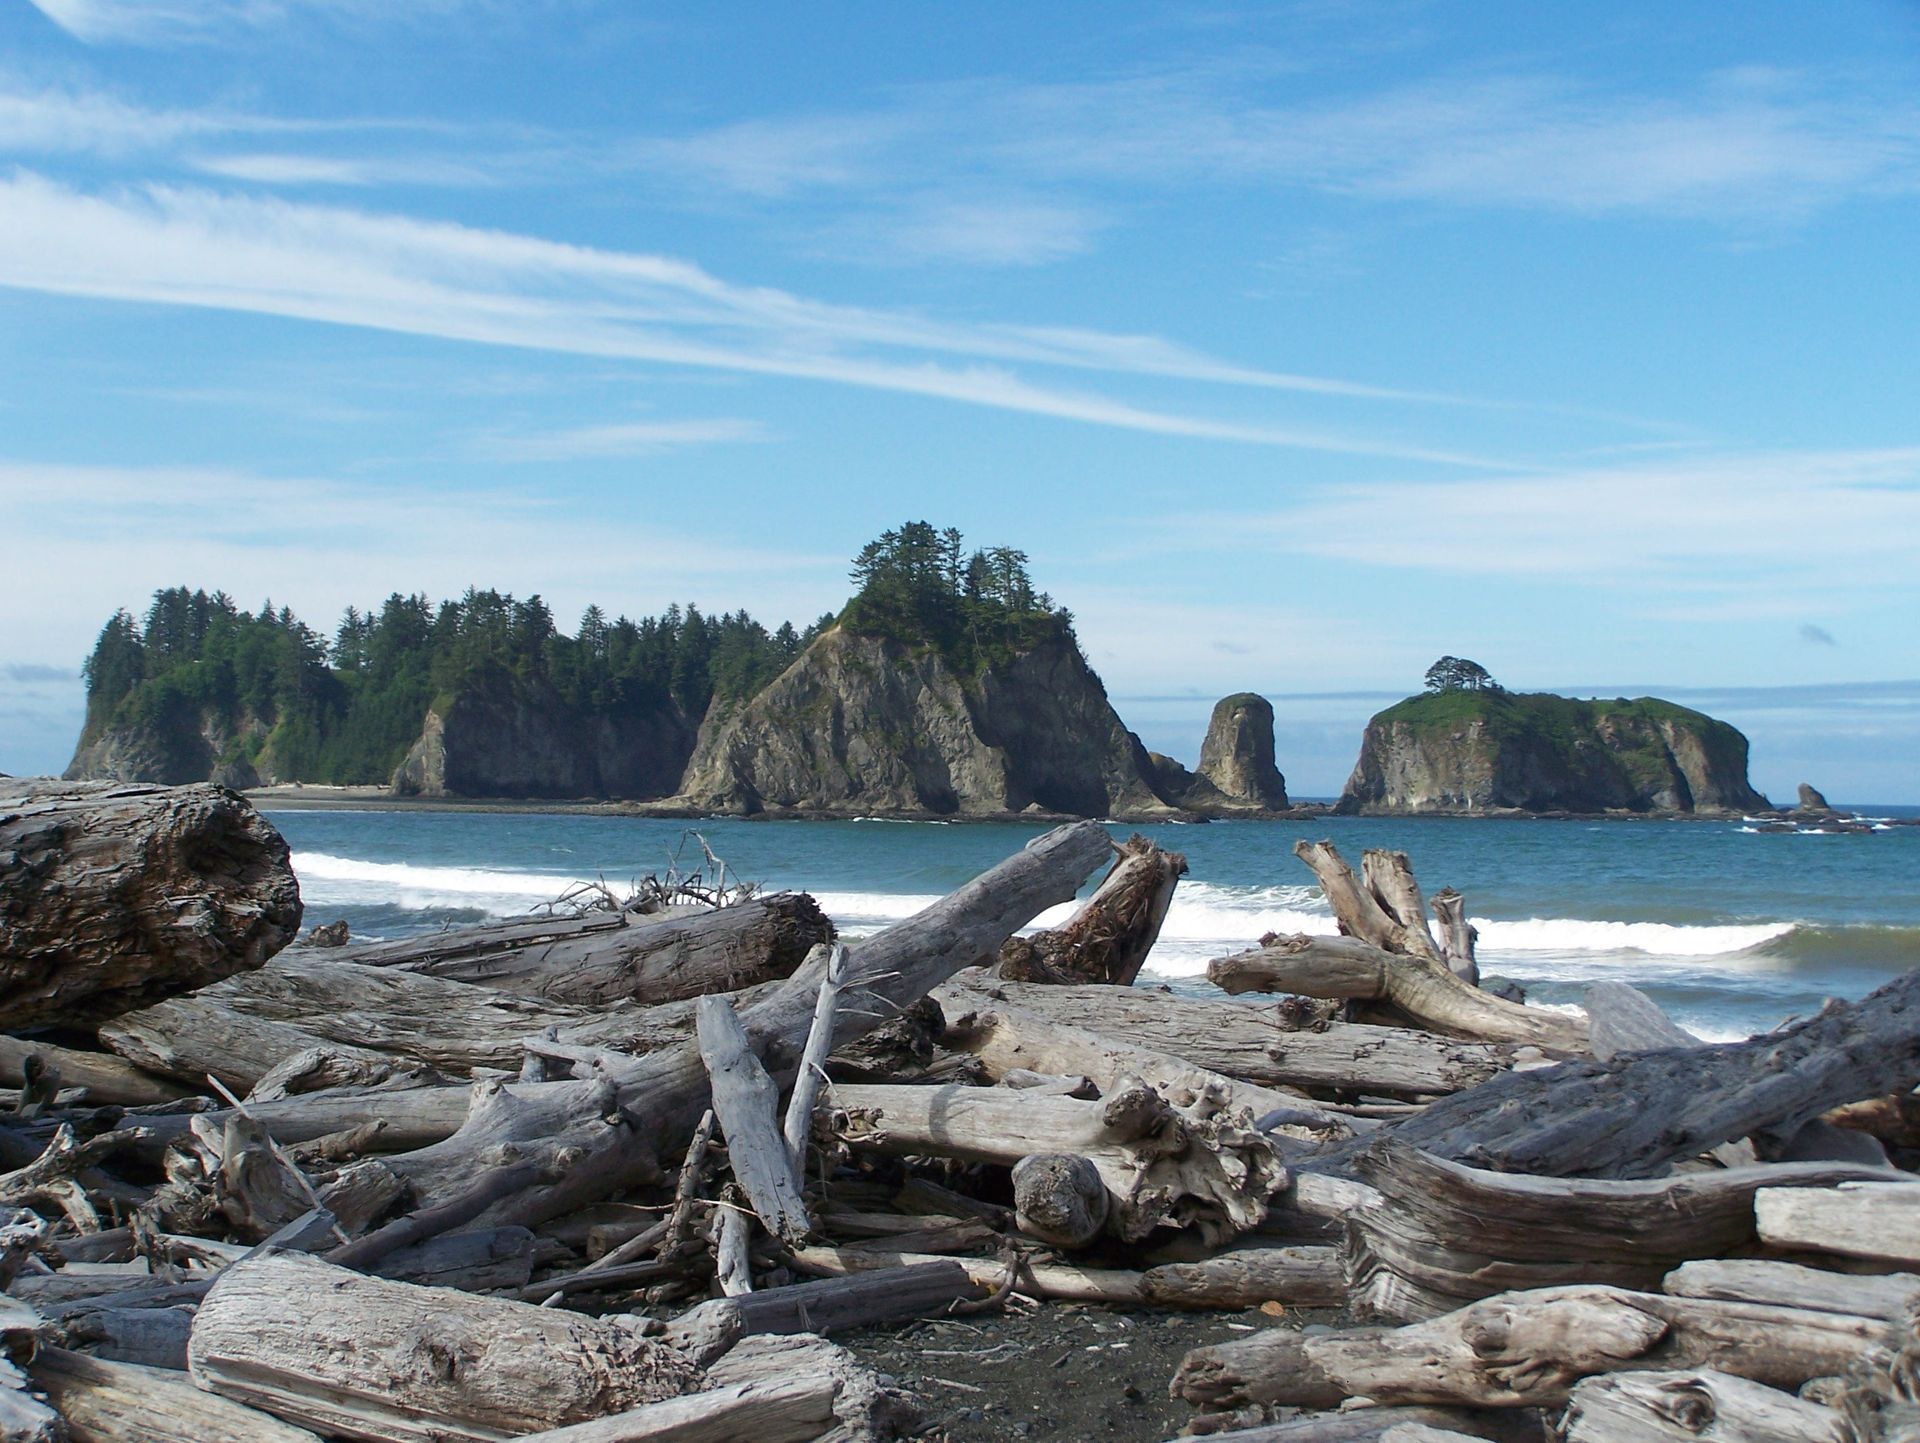 Driftwood on the shore at Olympic National Park.